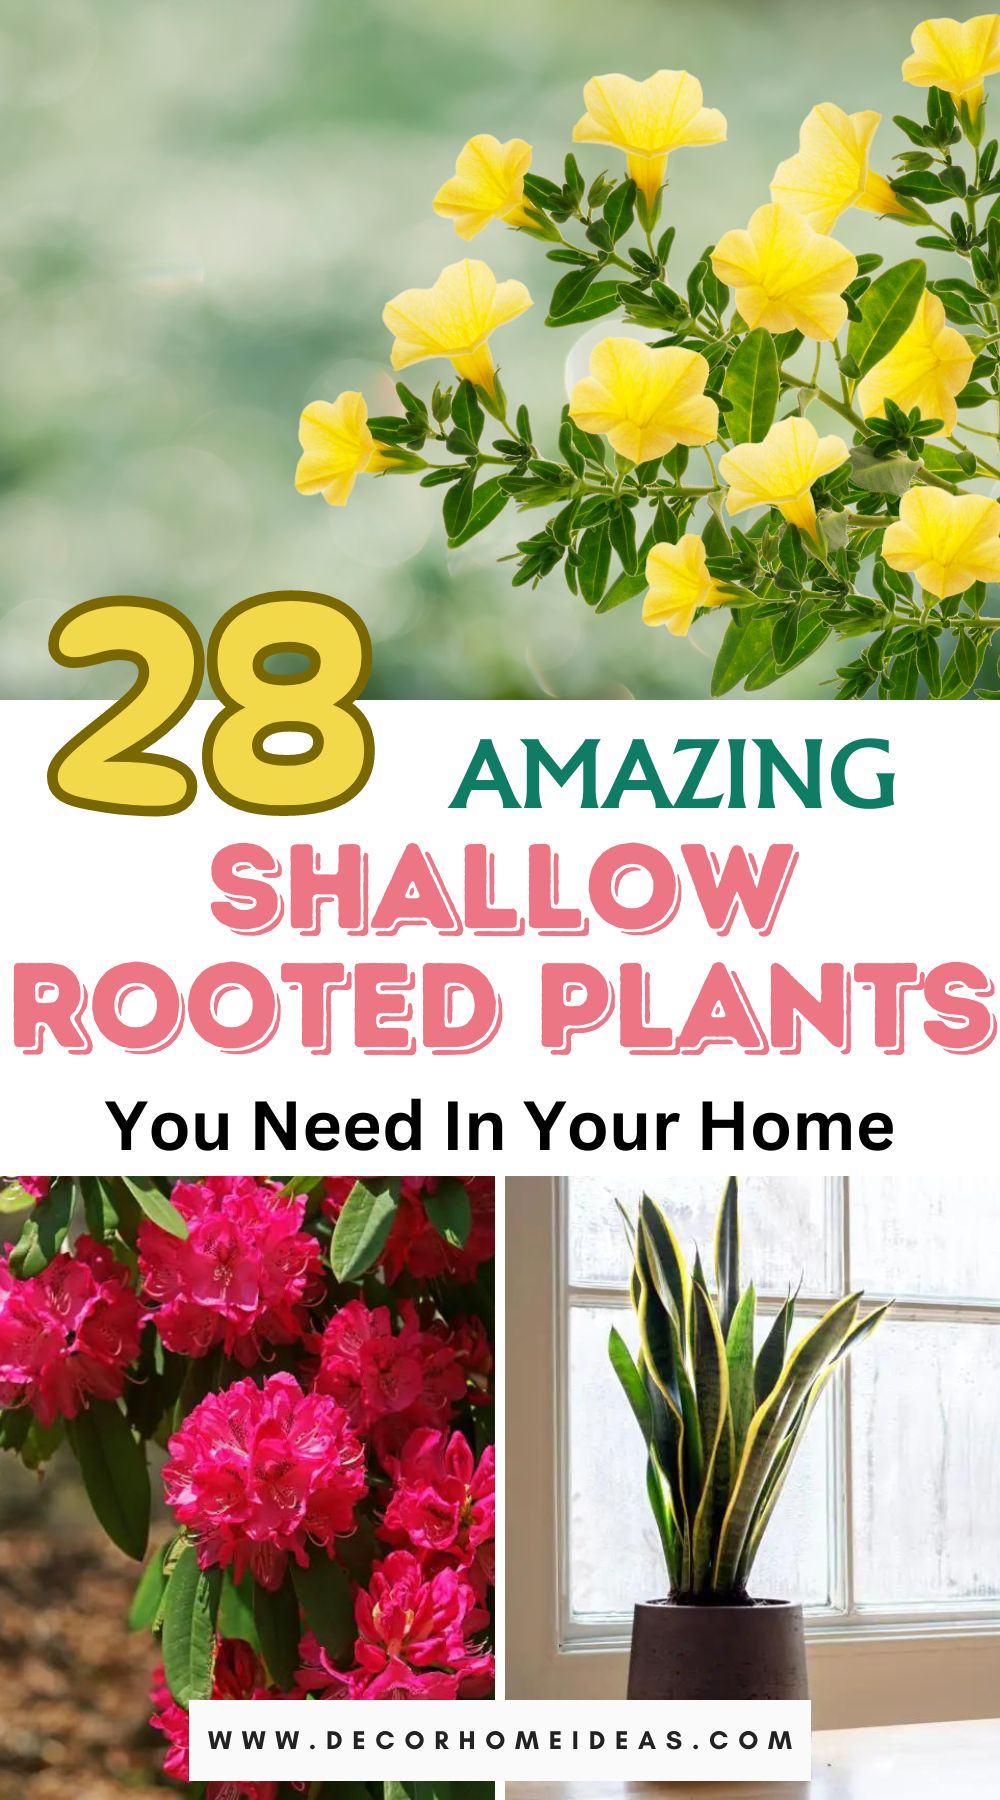 Discover the perfect green companions for your home with our guide to shallow-rooted plants. Explore essential tips for their cultivation, bringing nature's beauty to your space with ease.